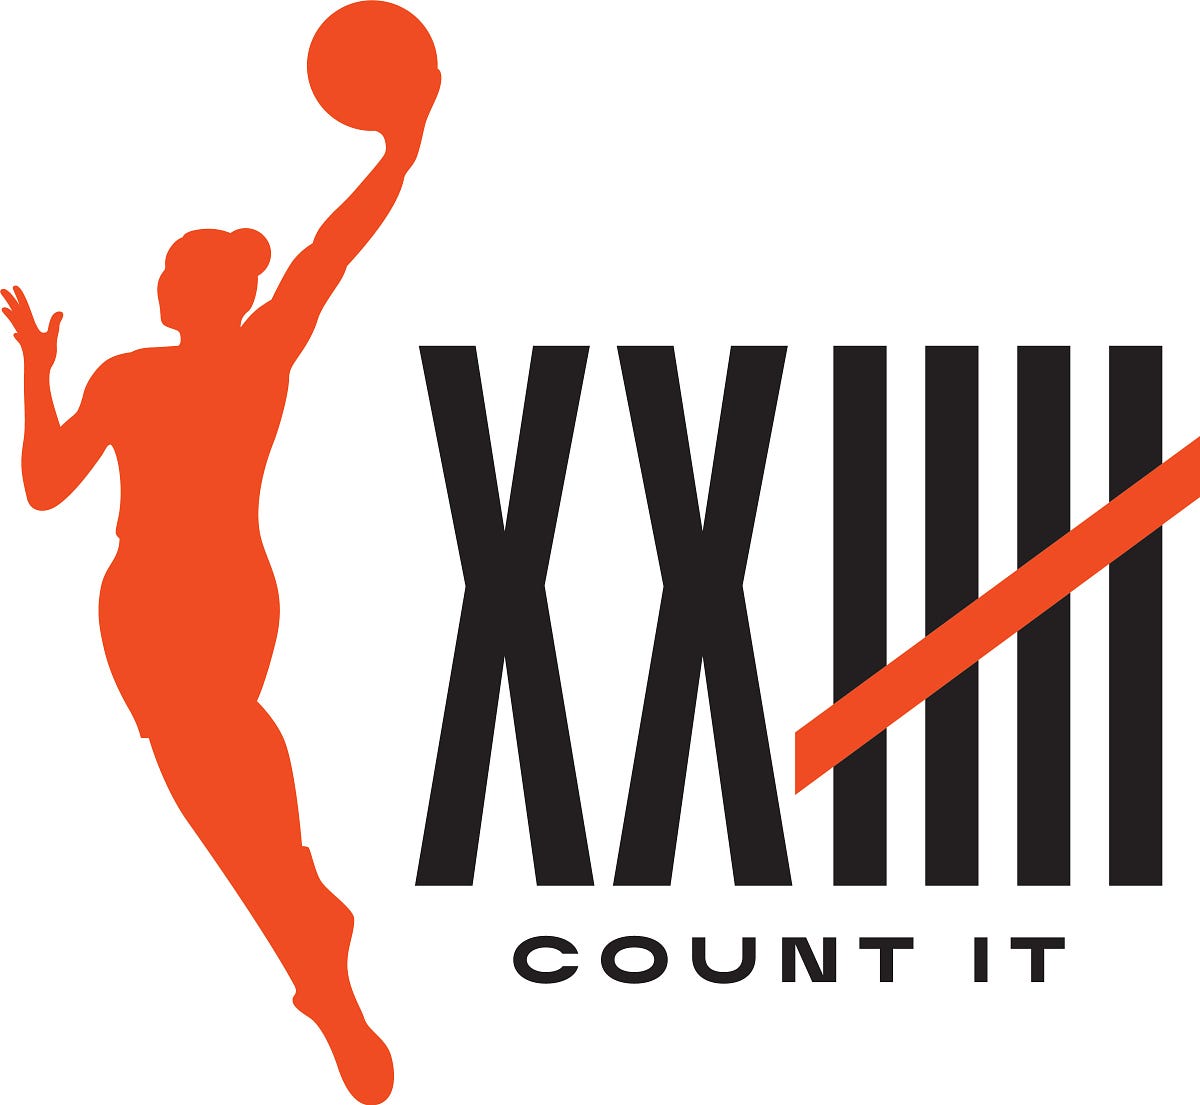 Free WNBA League Pass with paid subscription to The Next! The Next